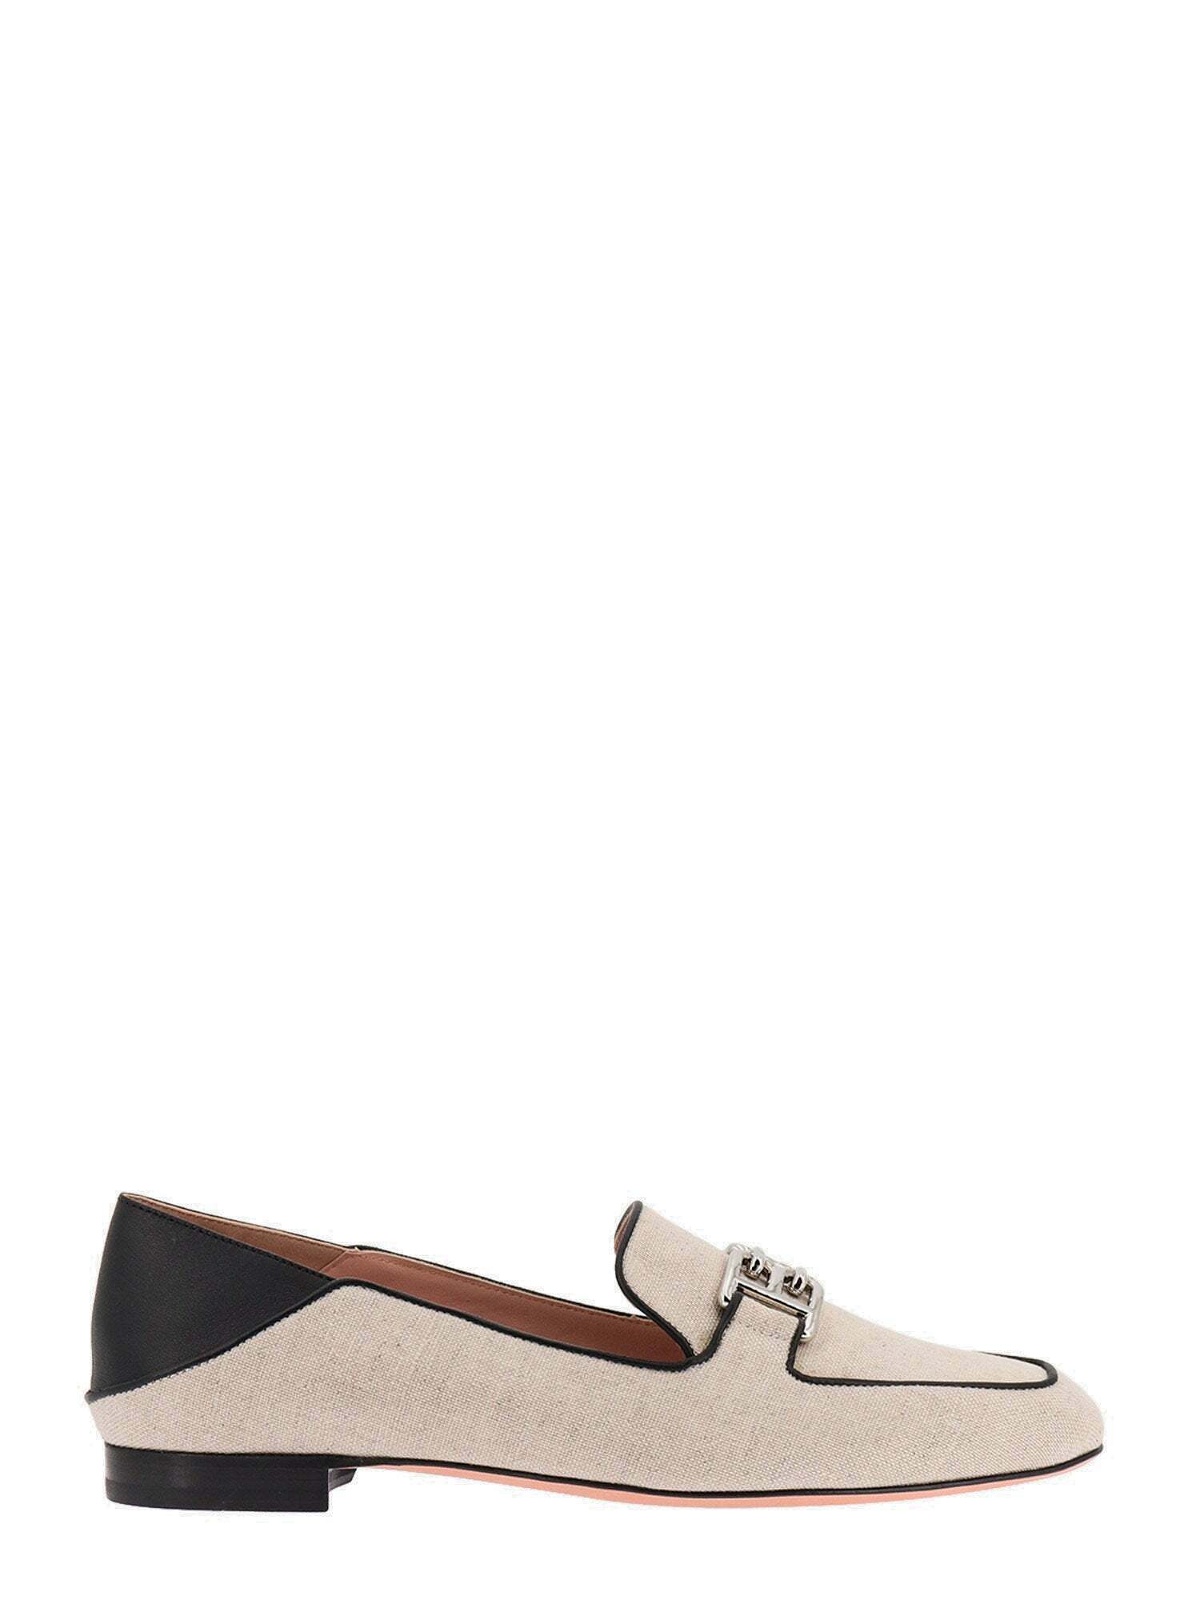 Bally Loafers Beige Womens Bally